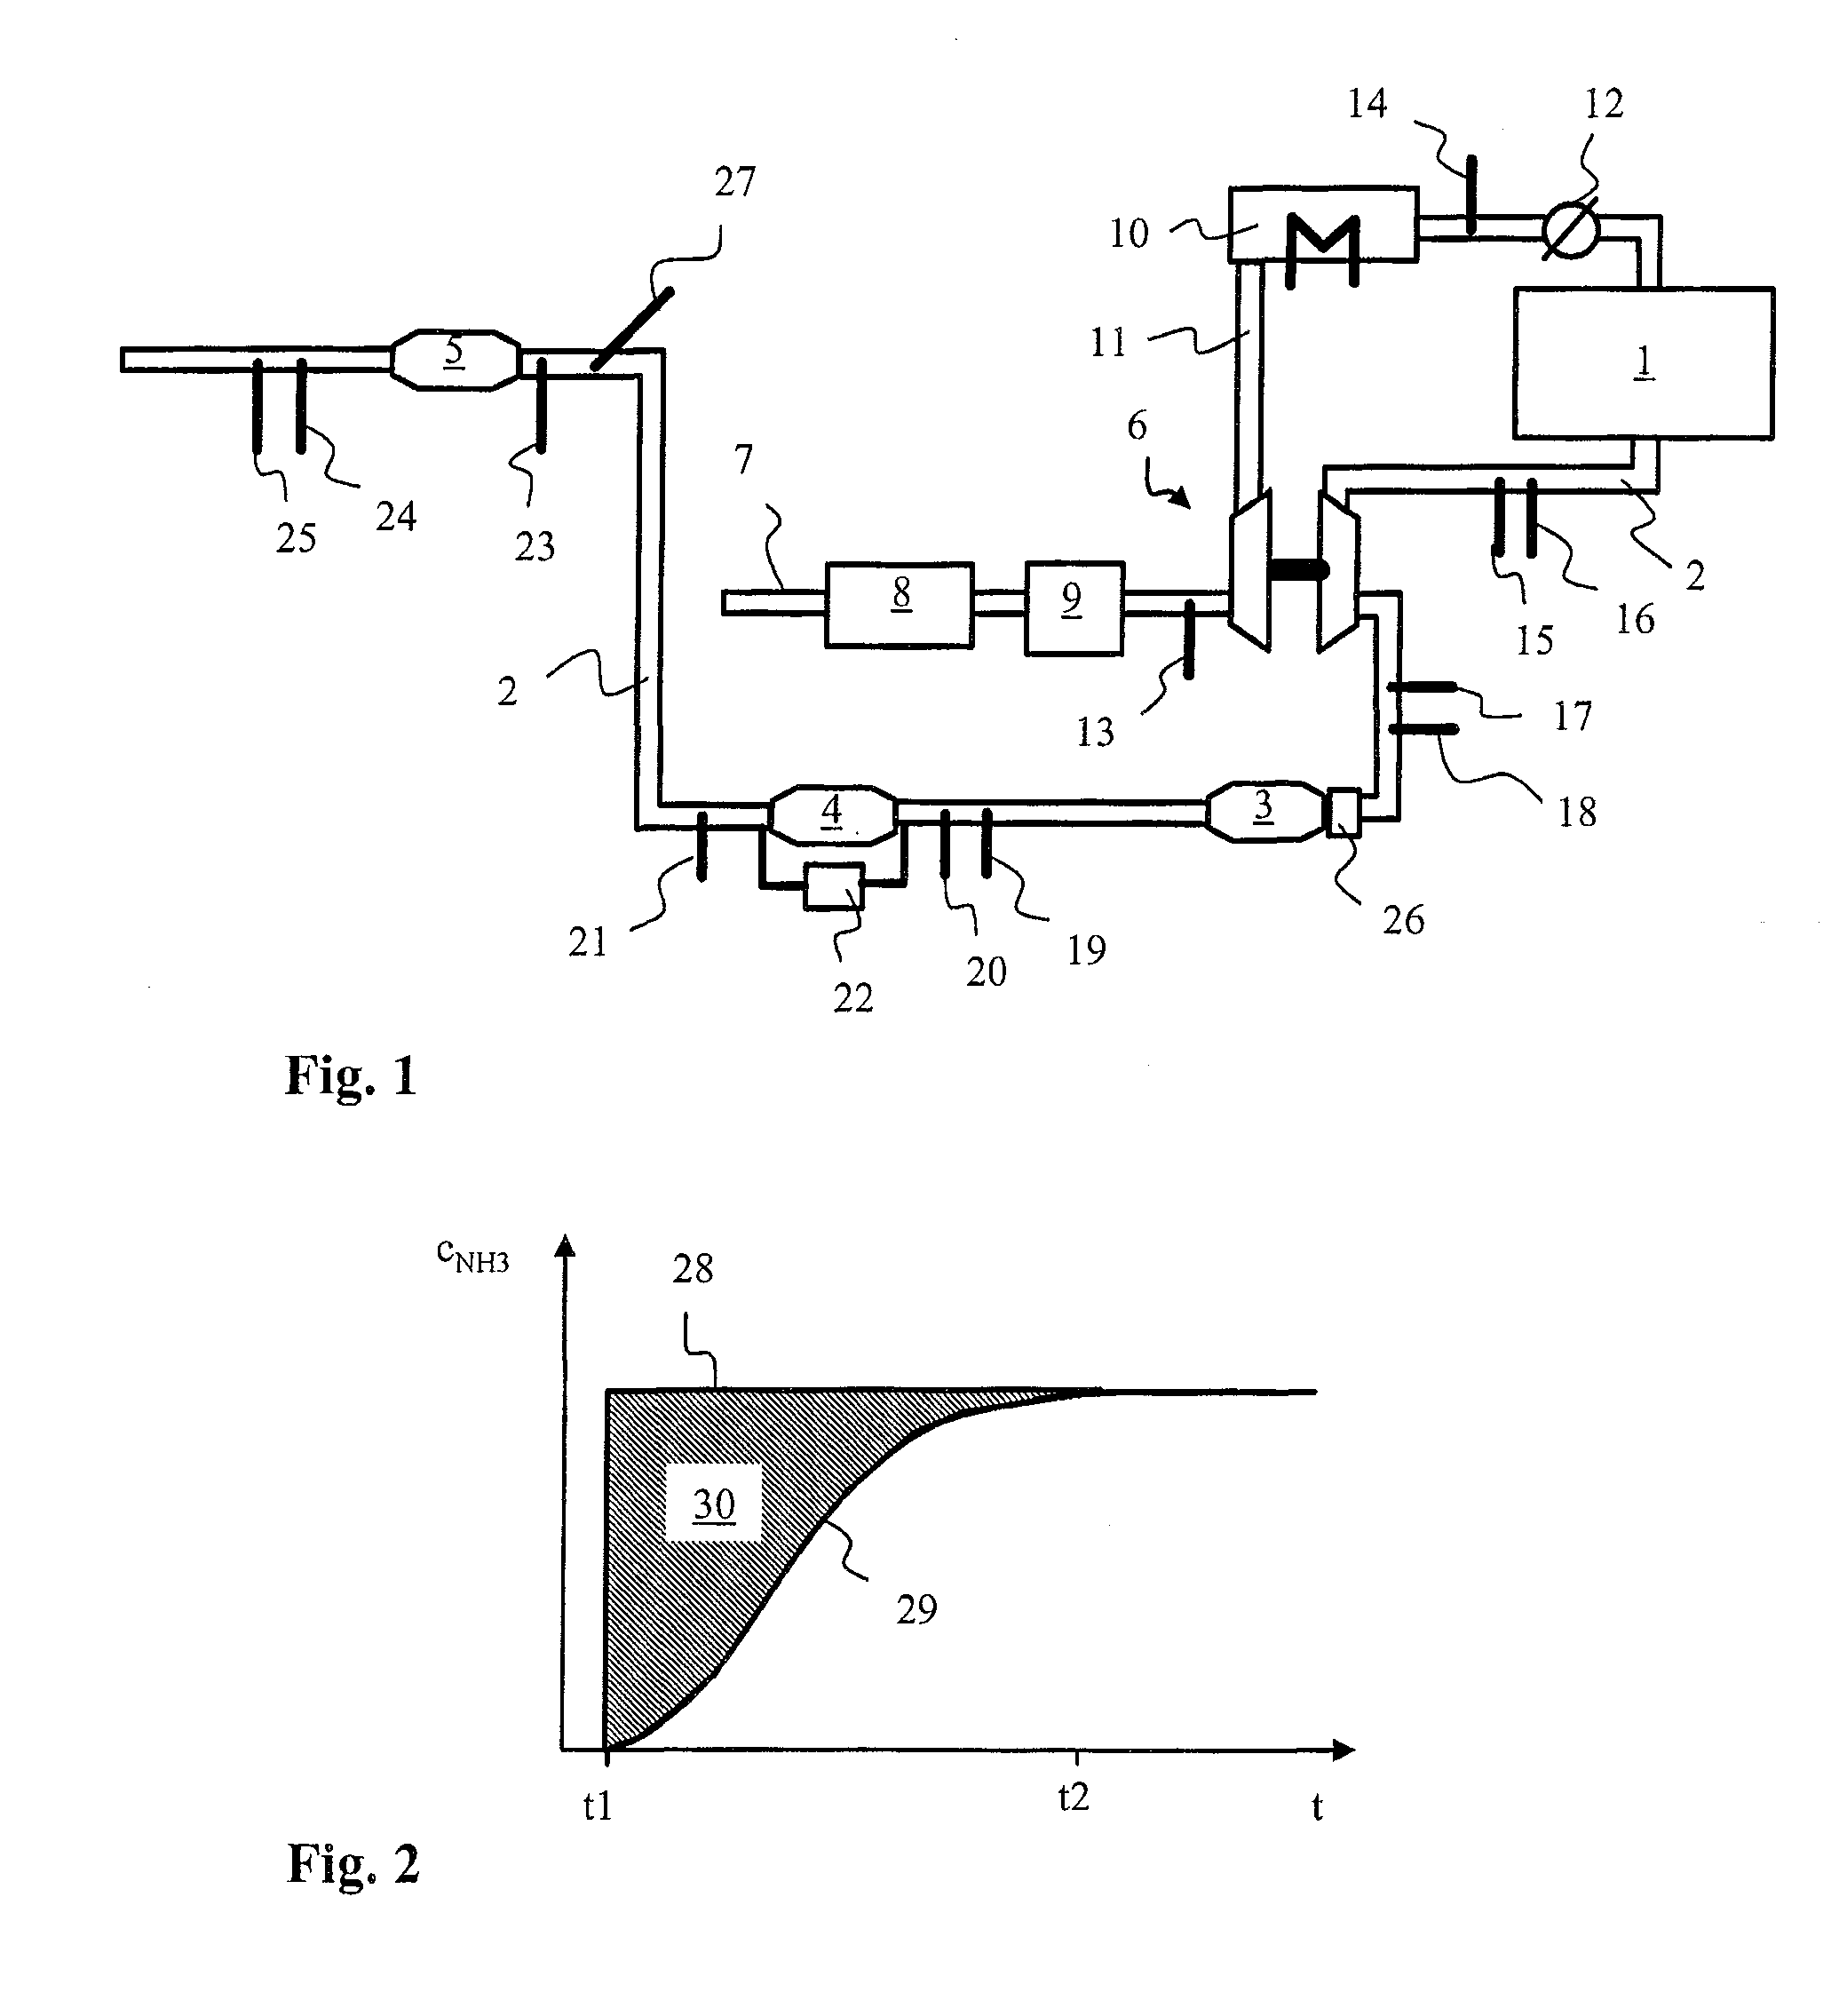 Method for Operating an Exhaust Gas Treatment System Having an SCR Catalytic Converter